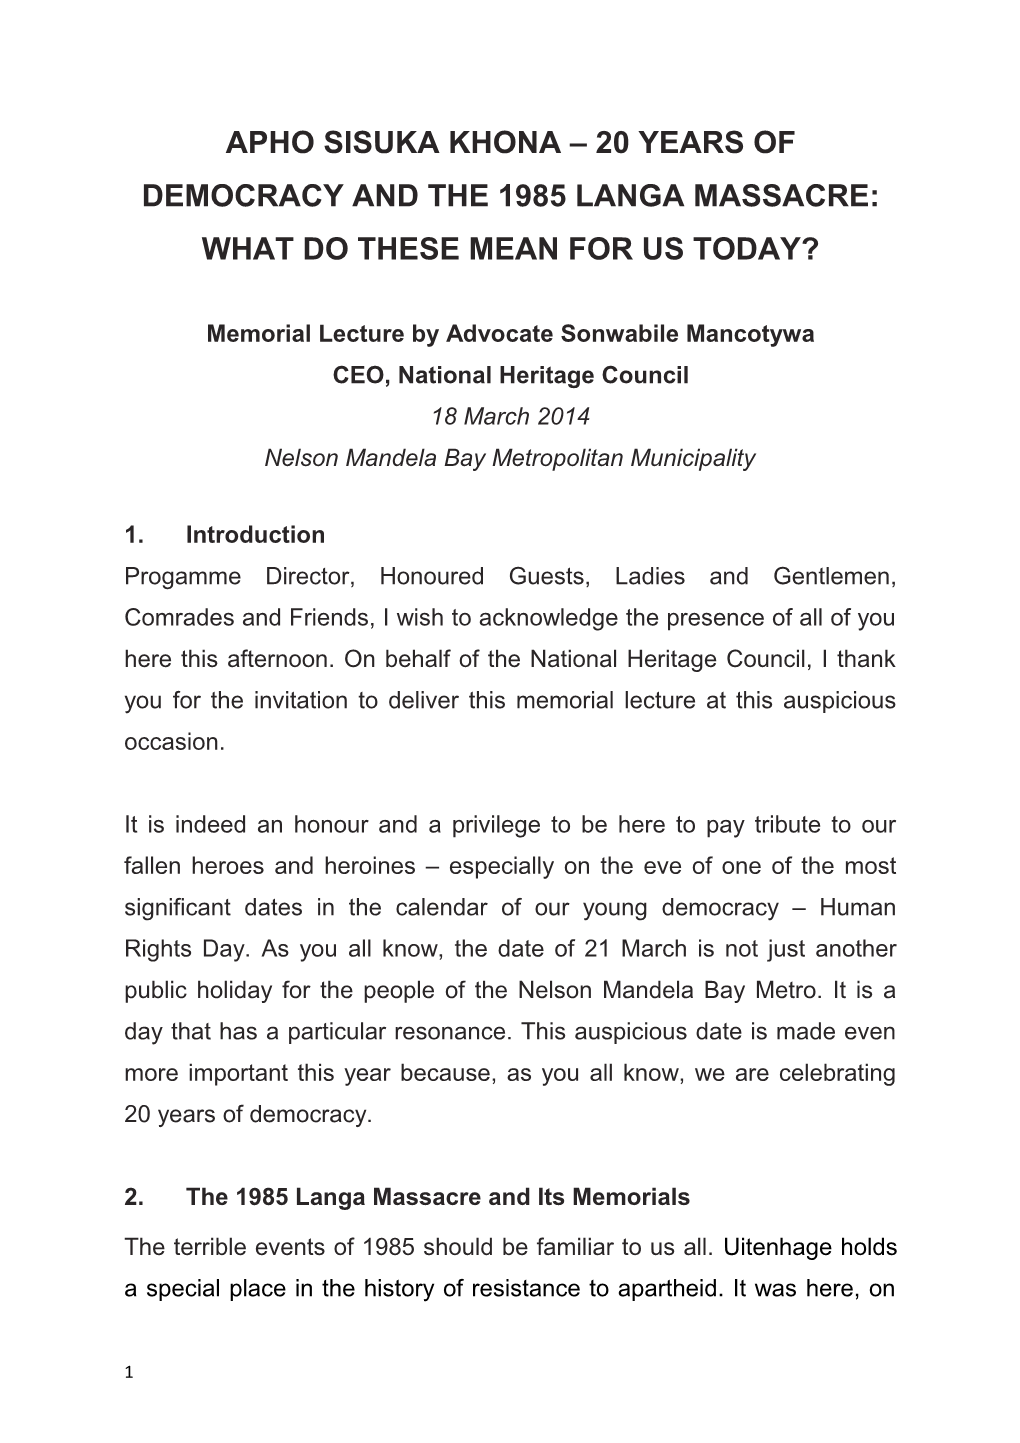 Memorial Lecture by Advocate Sonwabile Mancotywa